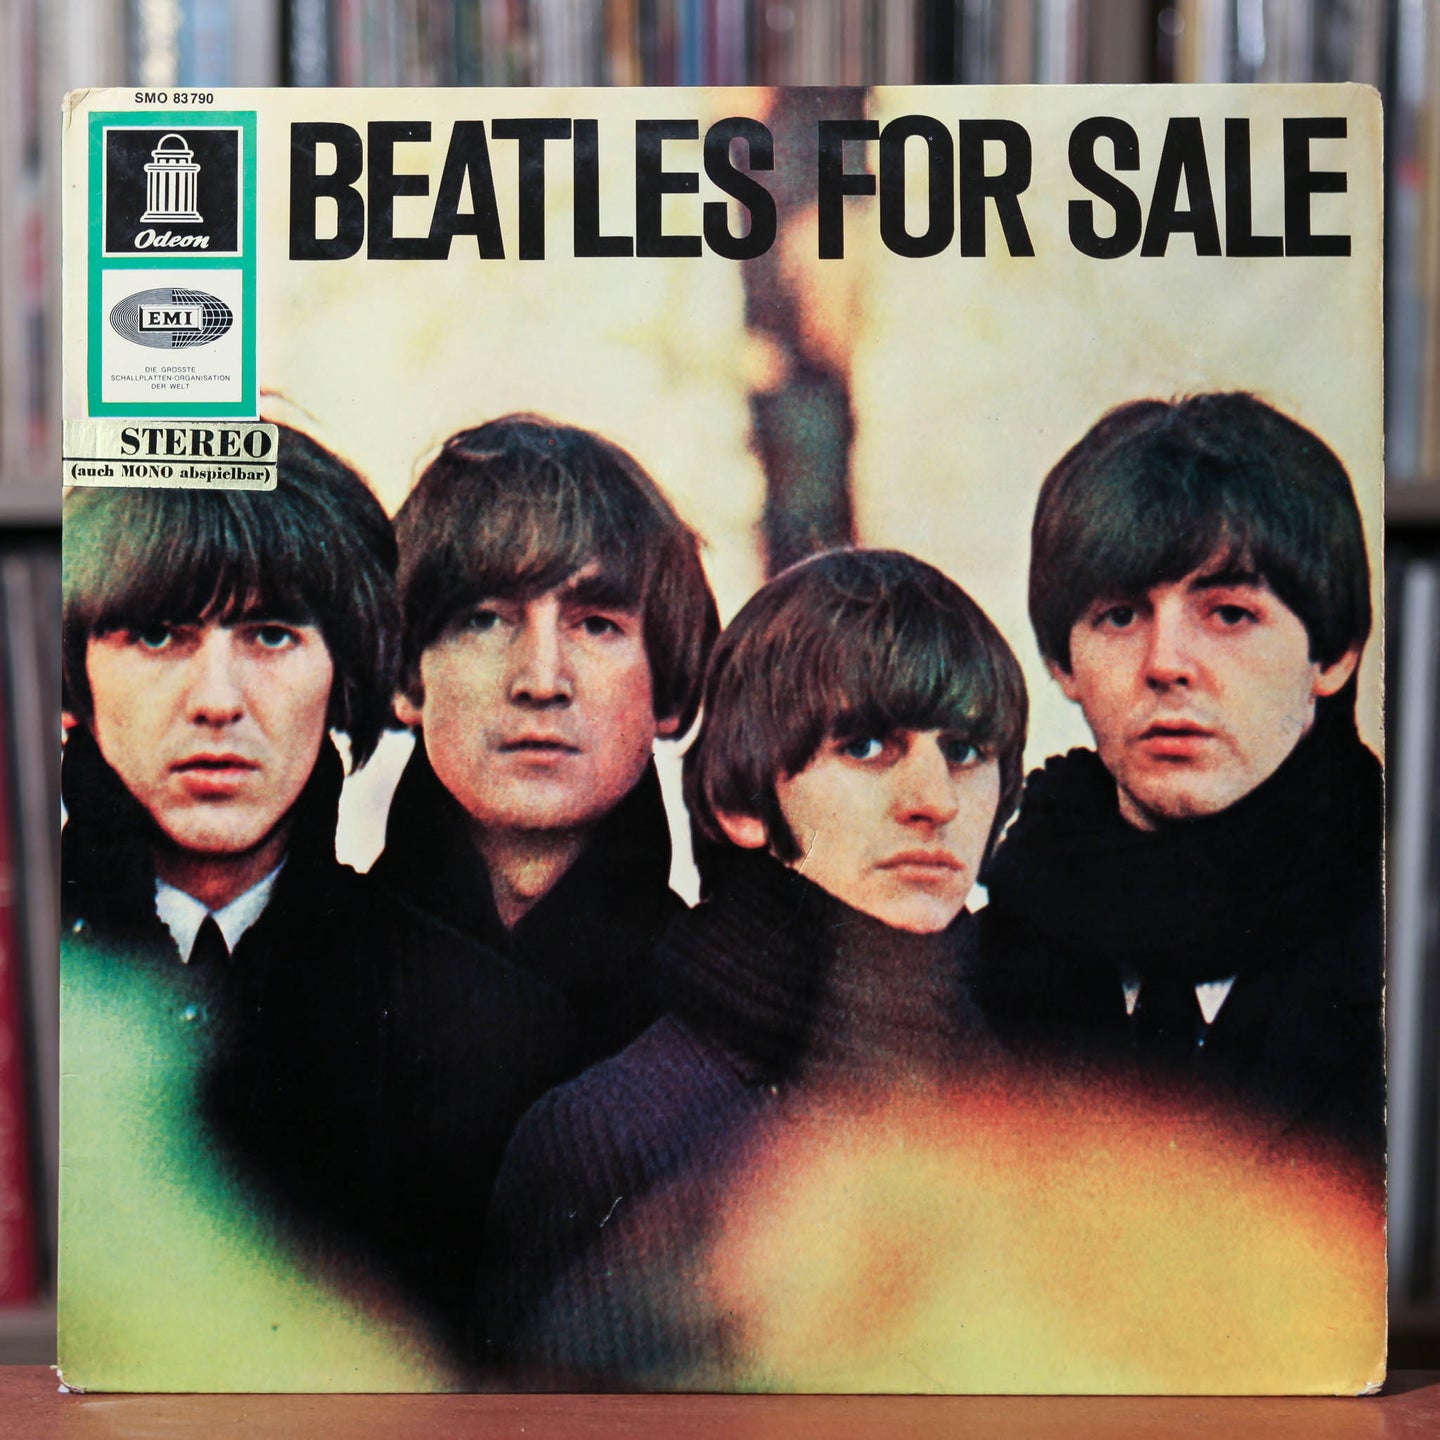 The Beatles - Beatles For Sale - RARE German Import - 1964 Odeon